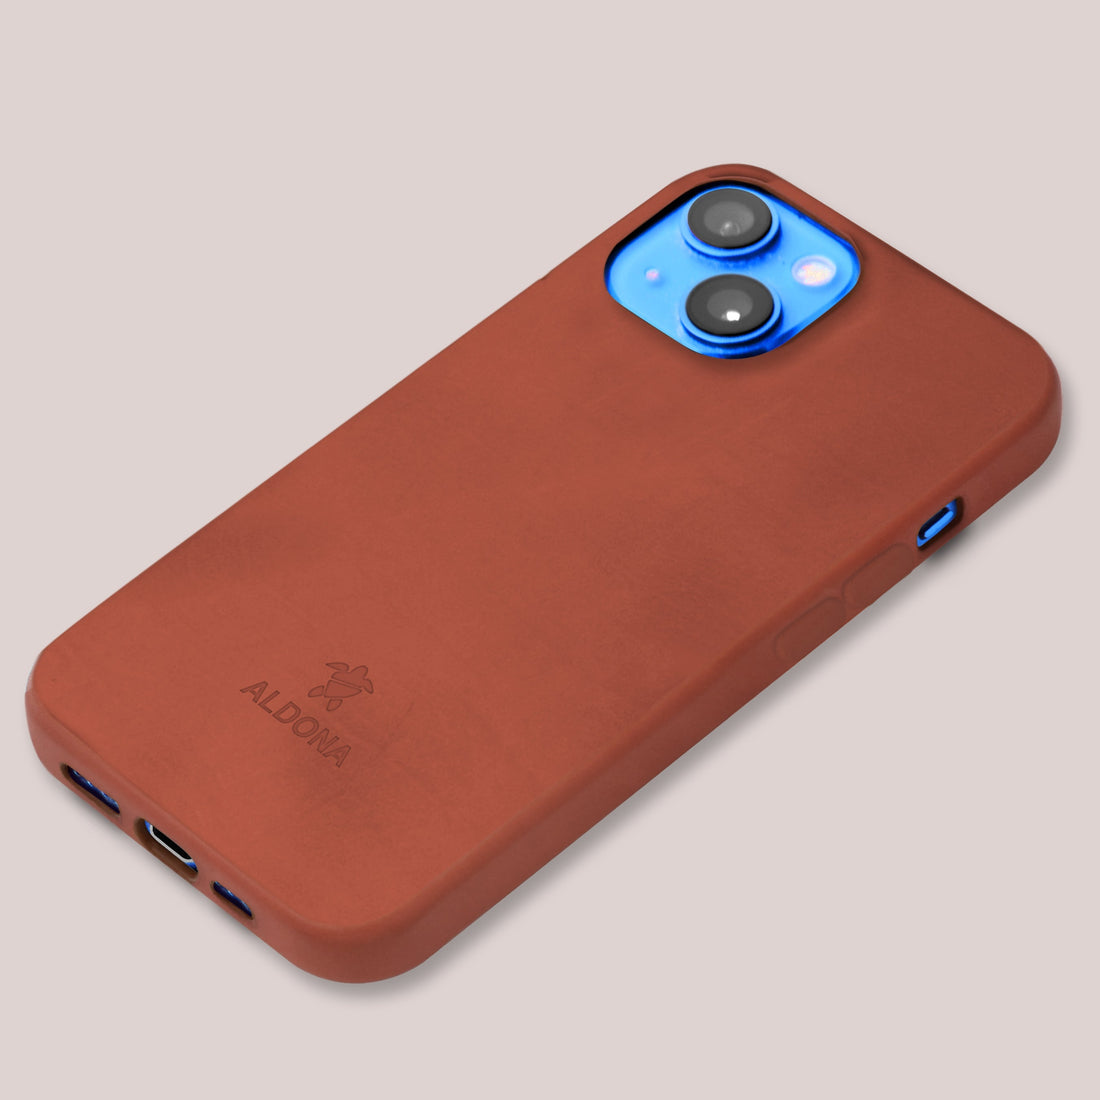 Kalon Case for iPhone 12 Pro with MagSafe Compatibility - Cognac